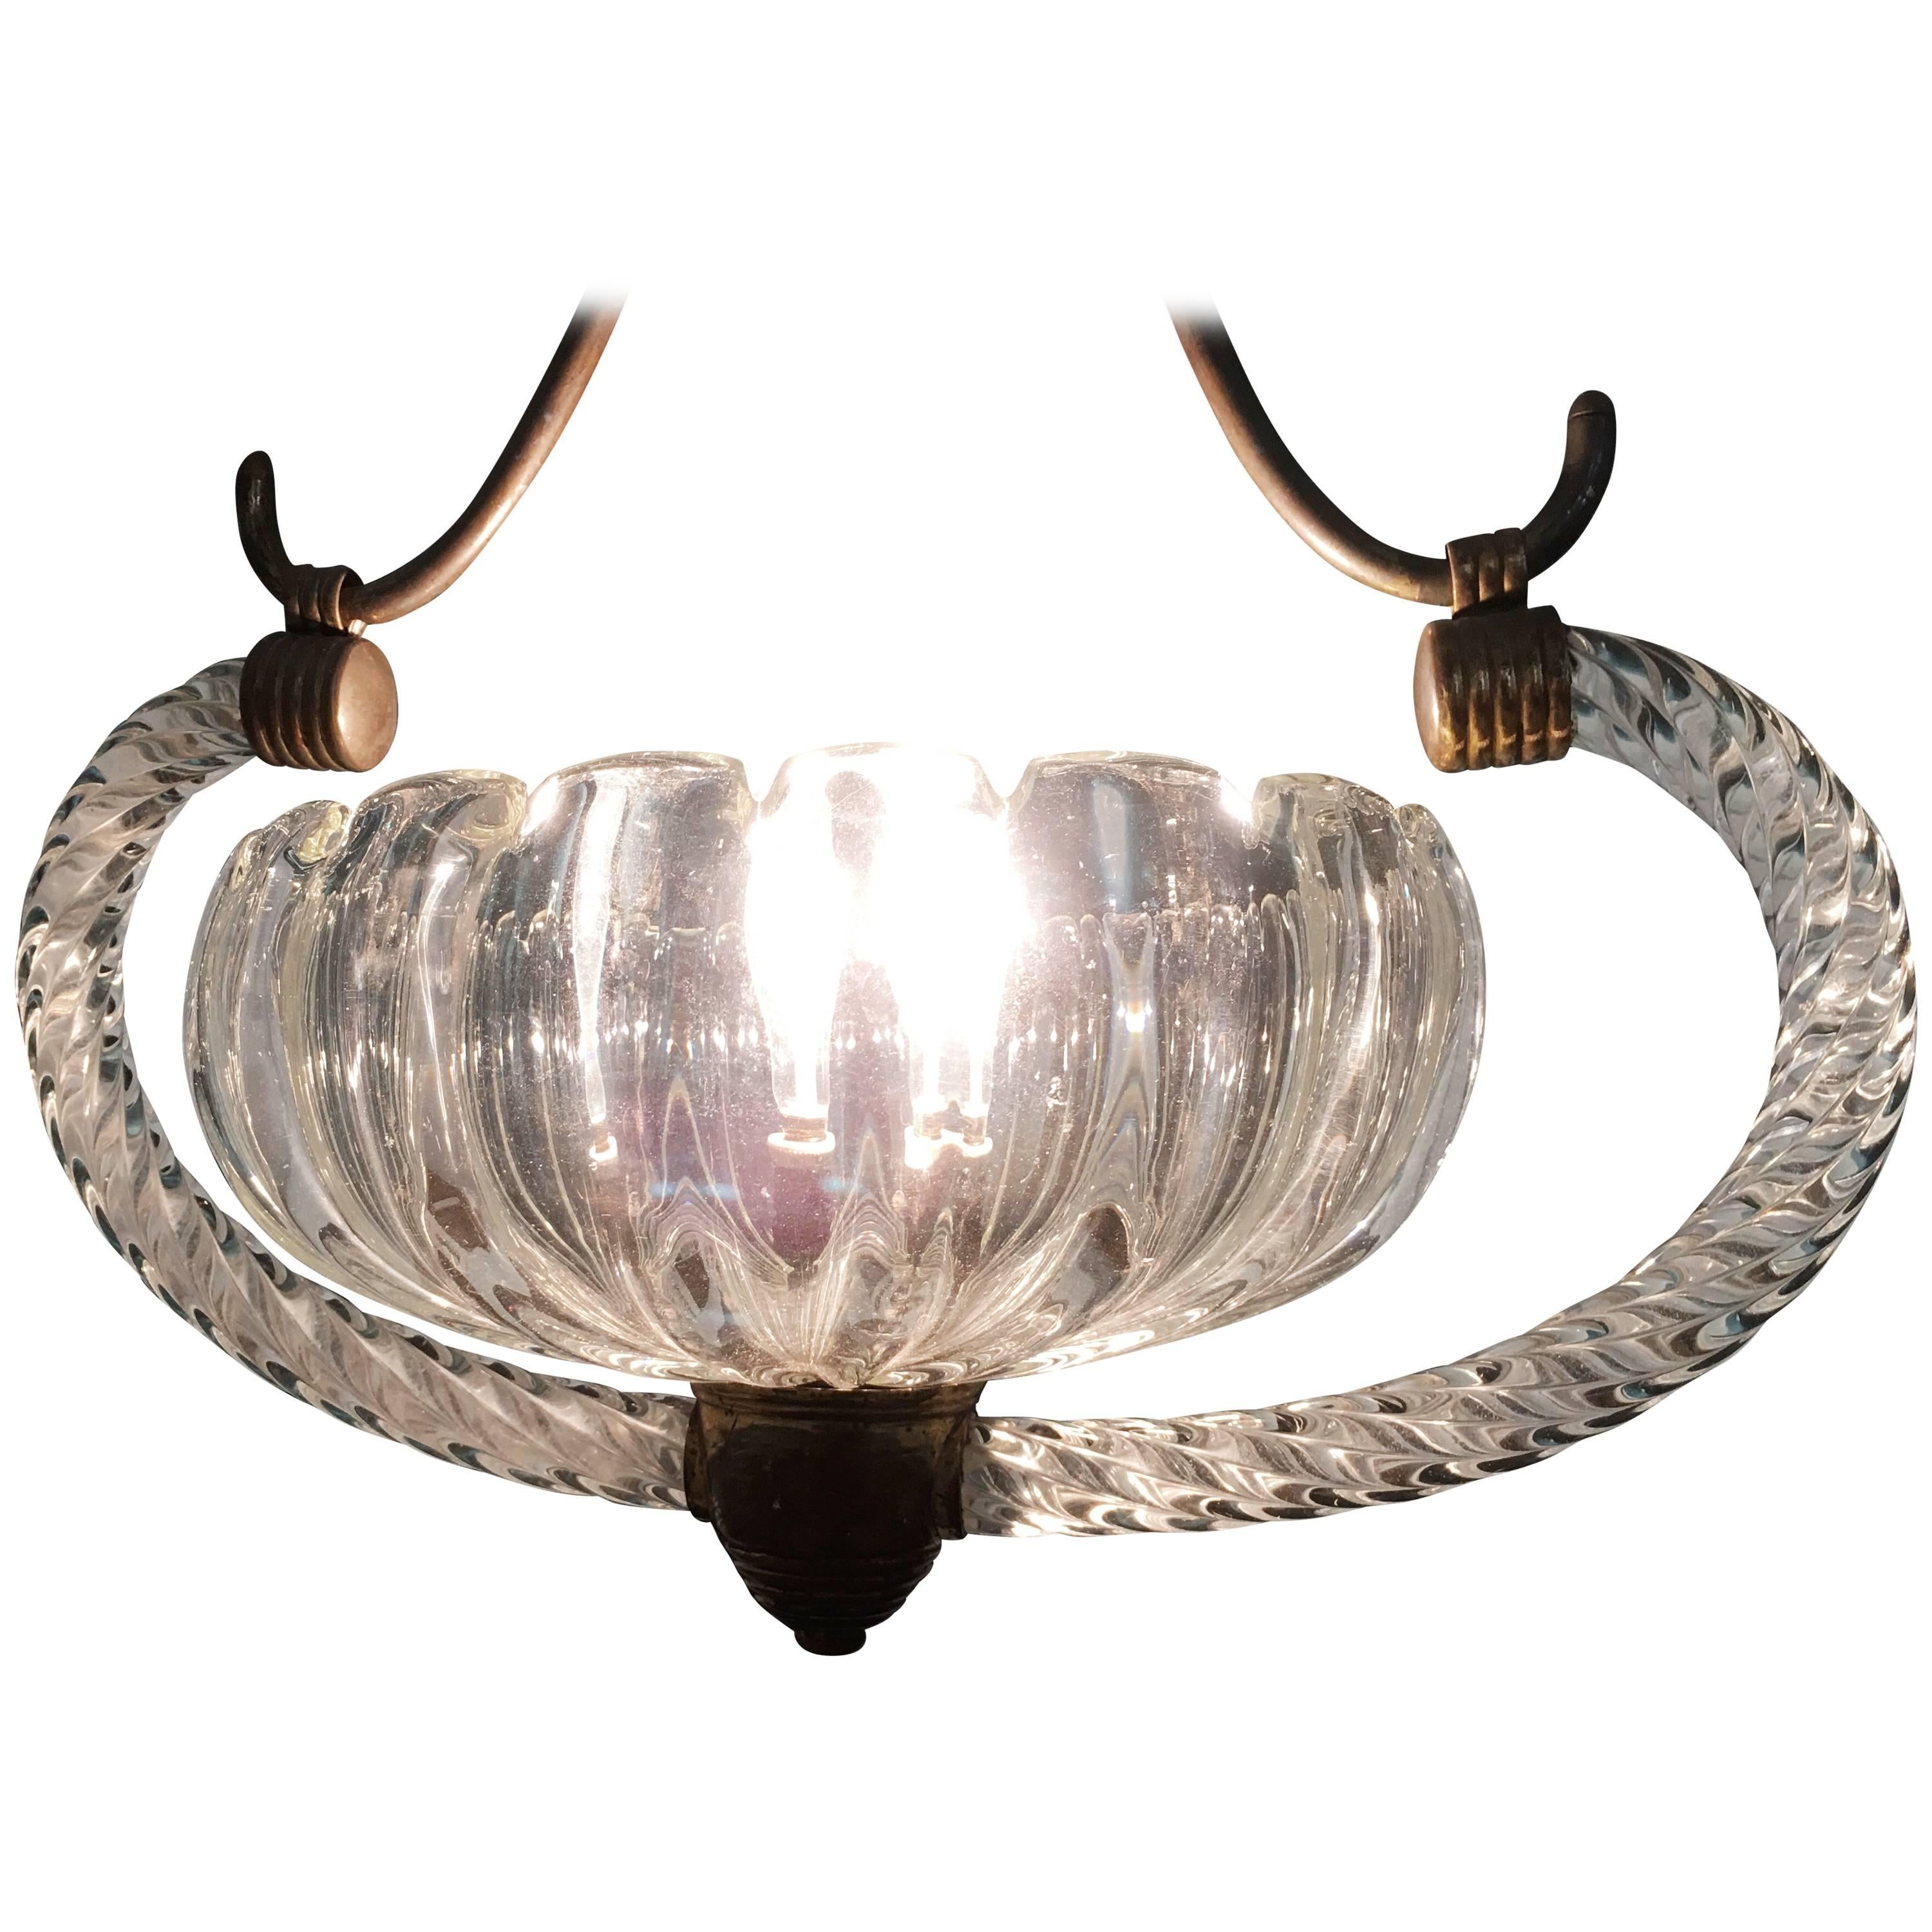 Chandelier Art Deco by Ercole Barovier, 1940s For Sale